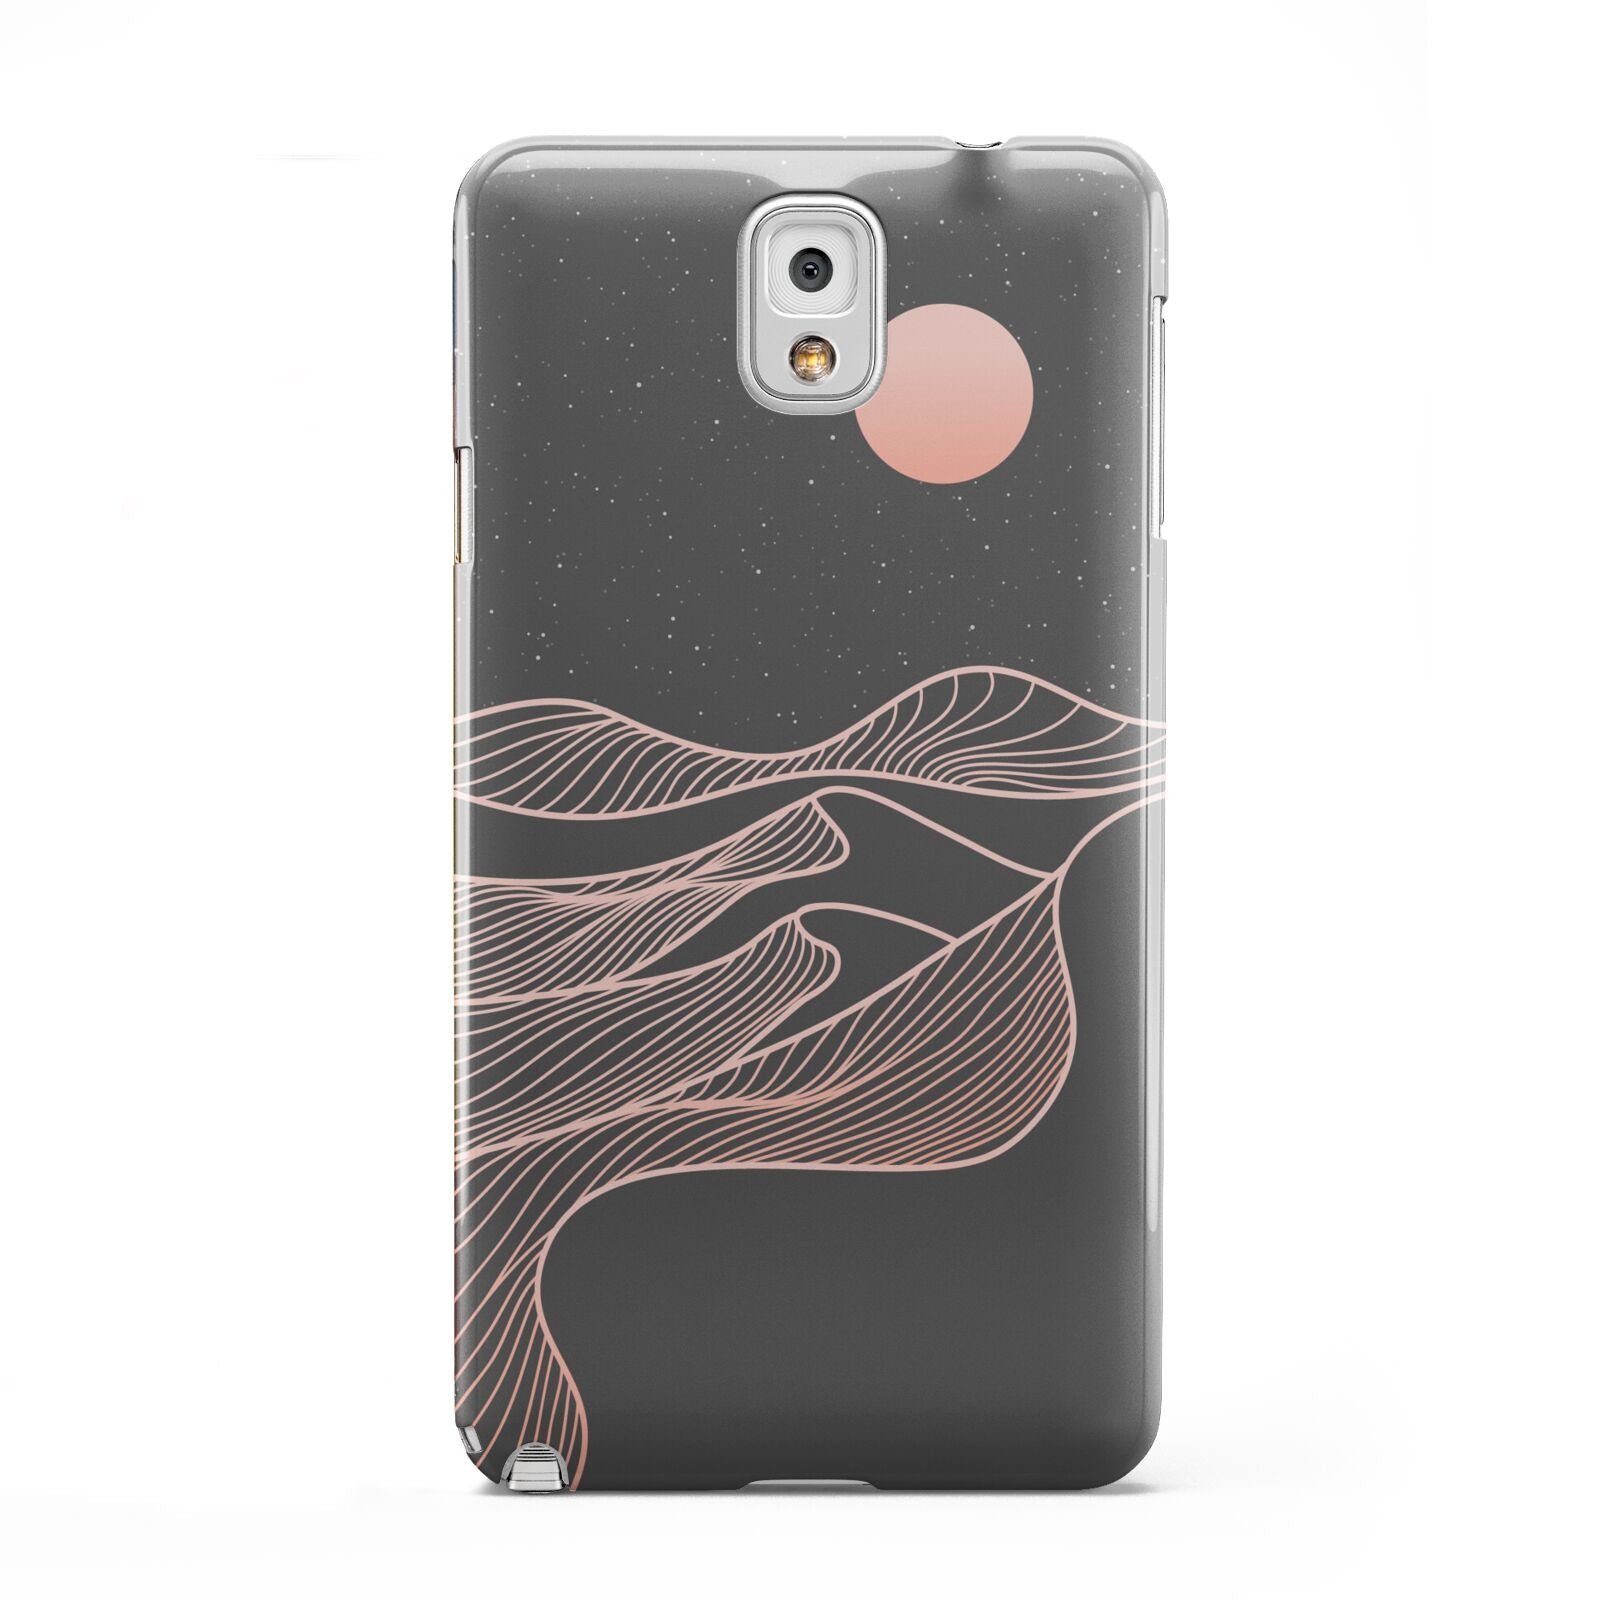 Abstract Sunset Samsung Galaxy Note 3 Case